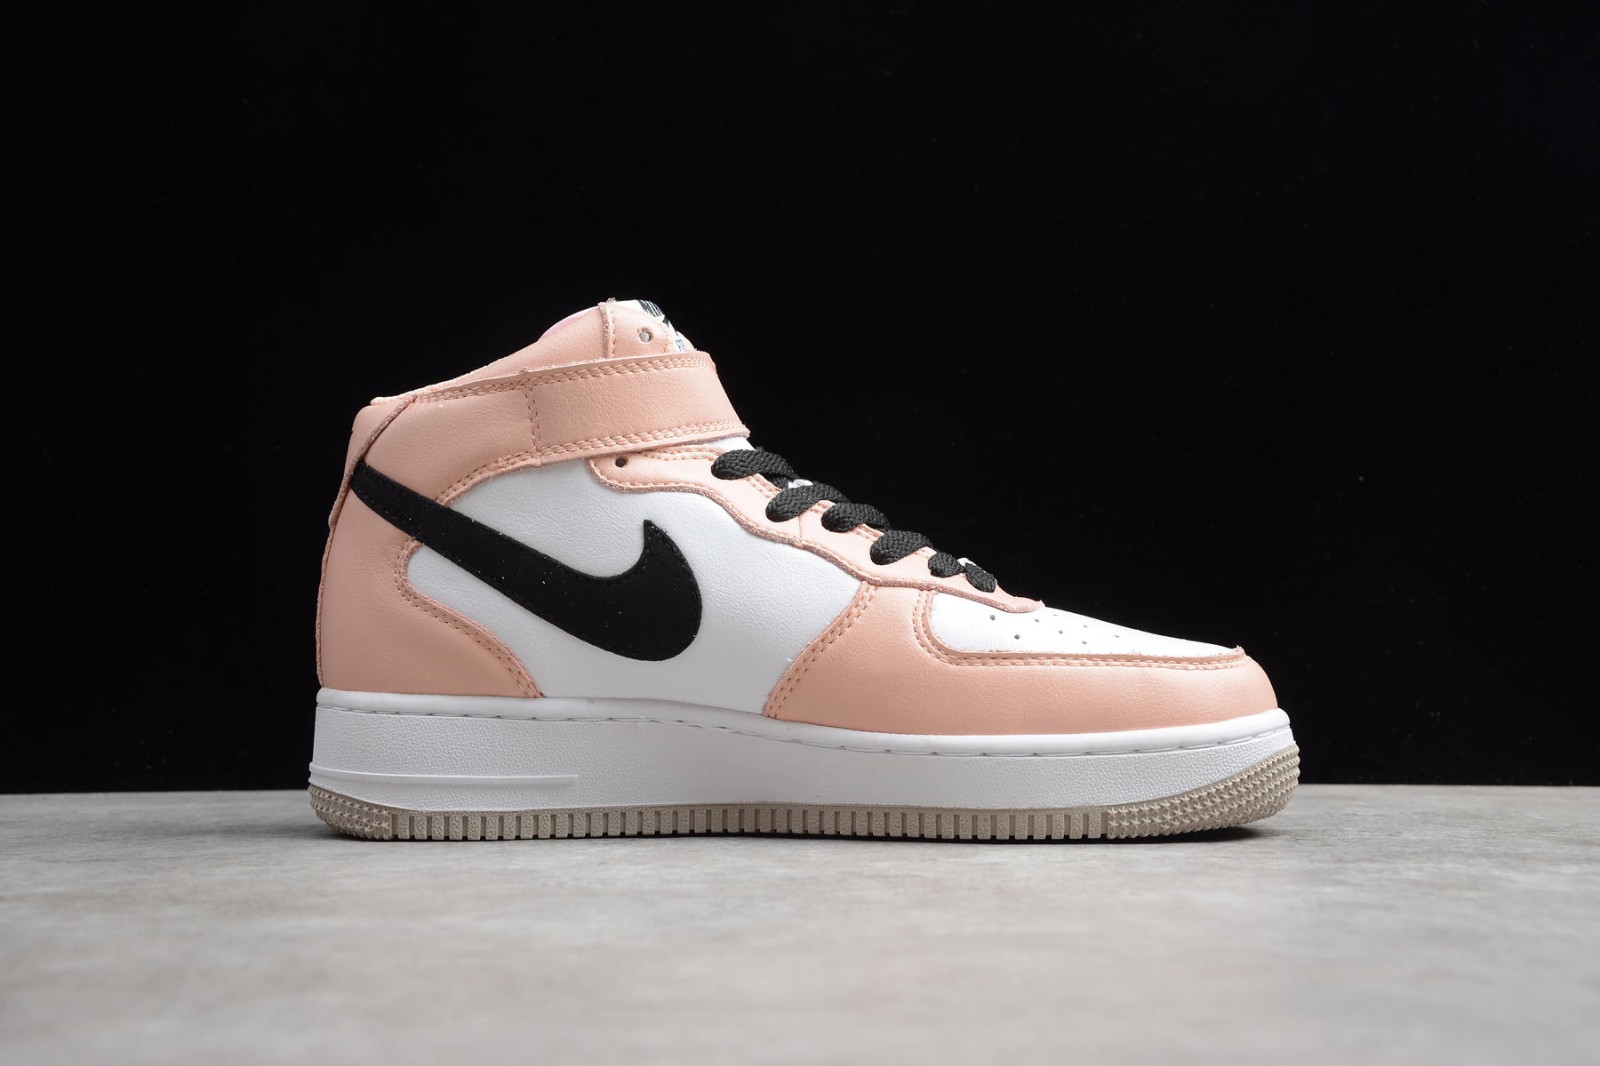 pink and white high top air force ones